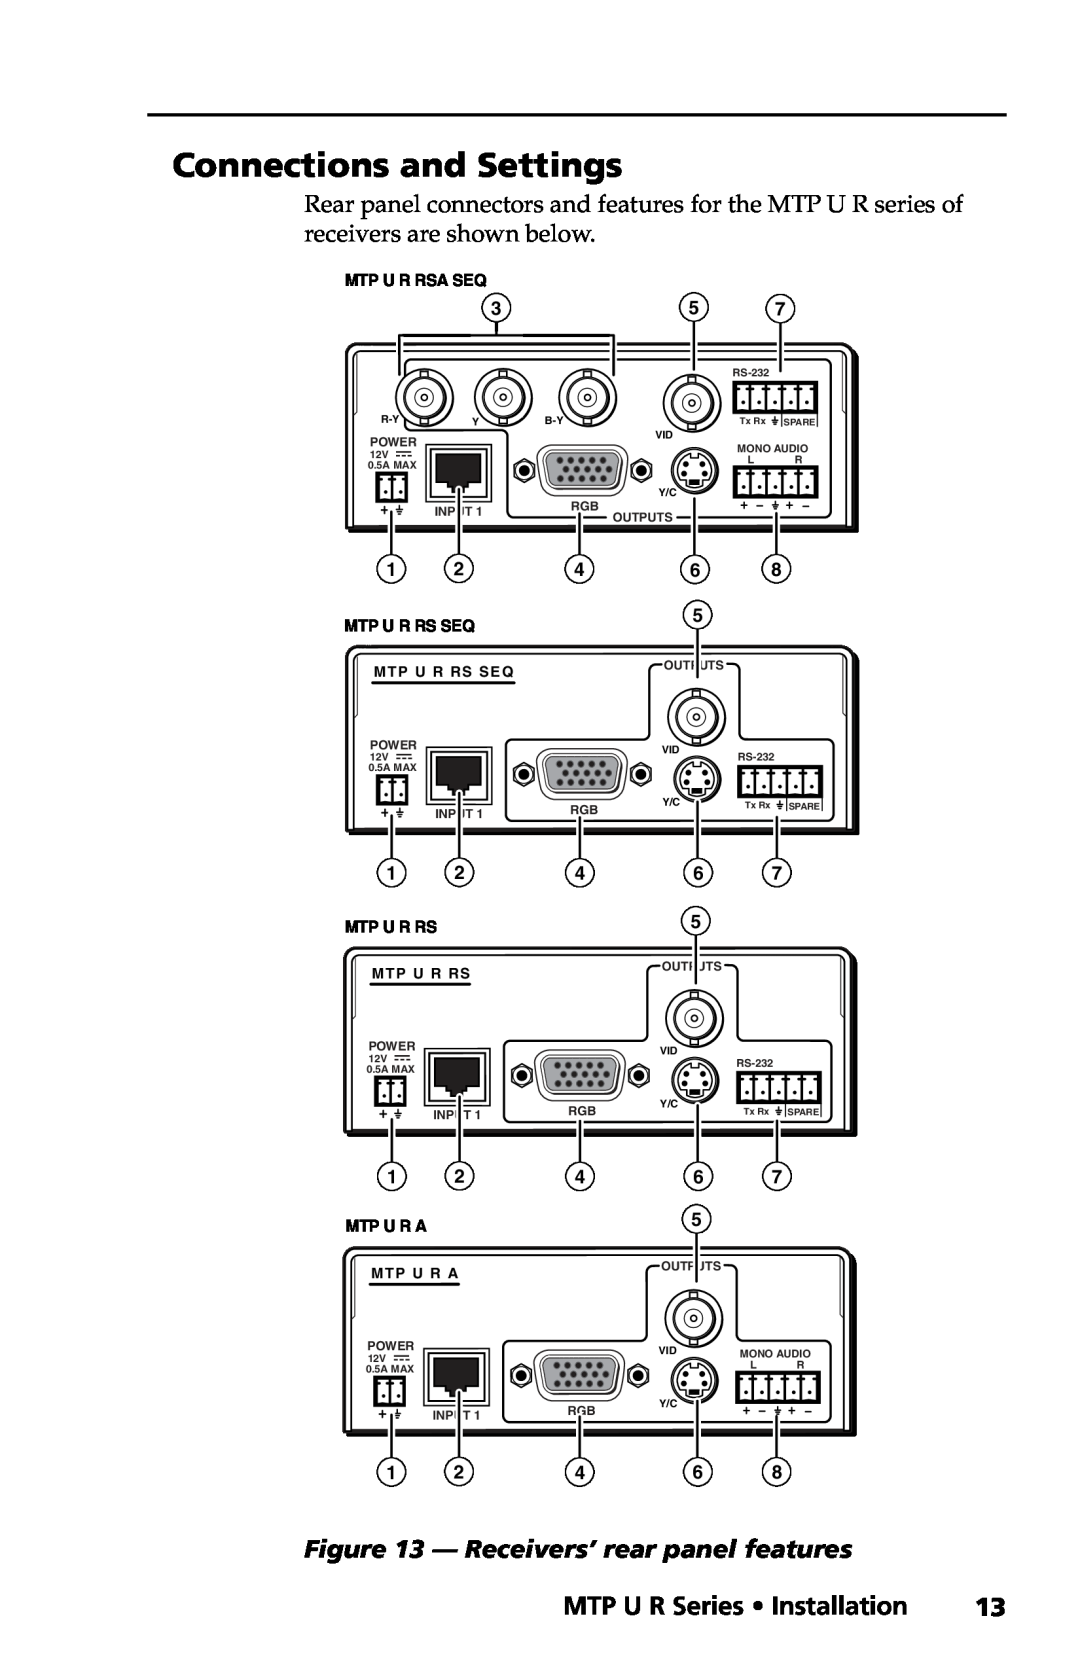 Extron electronic MTP U R RSA SEQ Connections and Settings, MTP U R Series Installation, Receivers’ rear panel features 